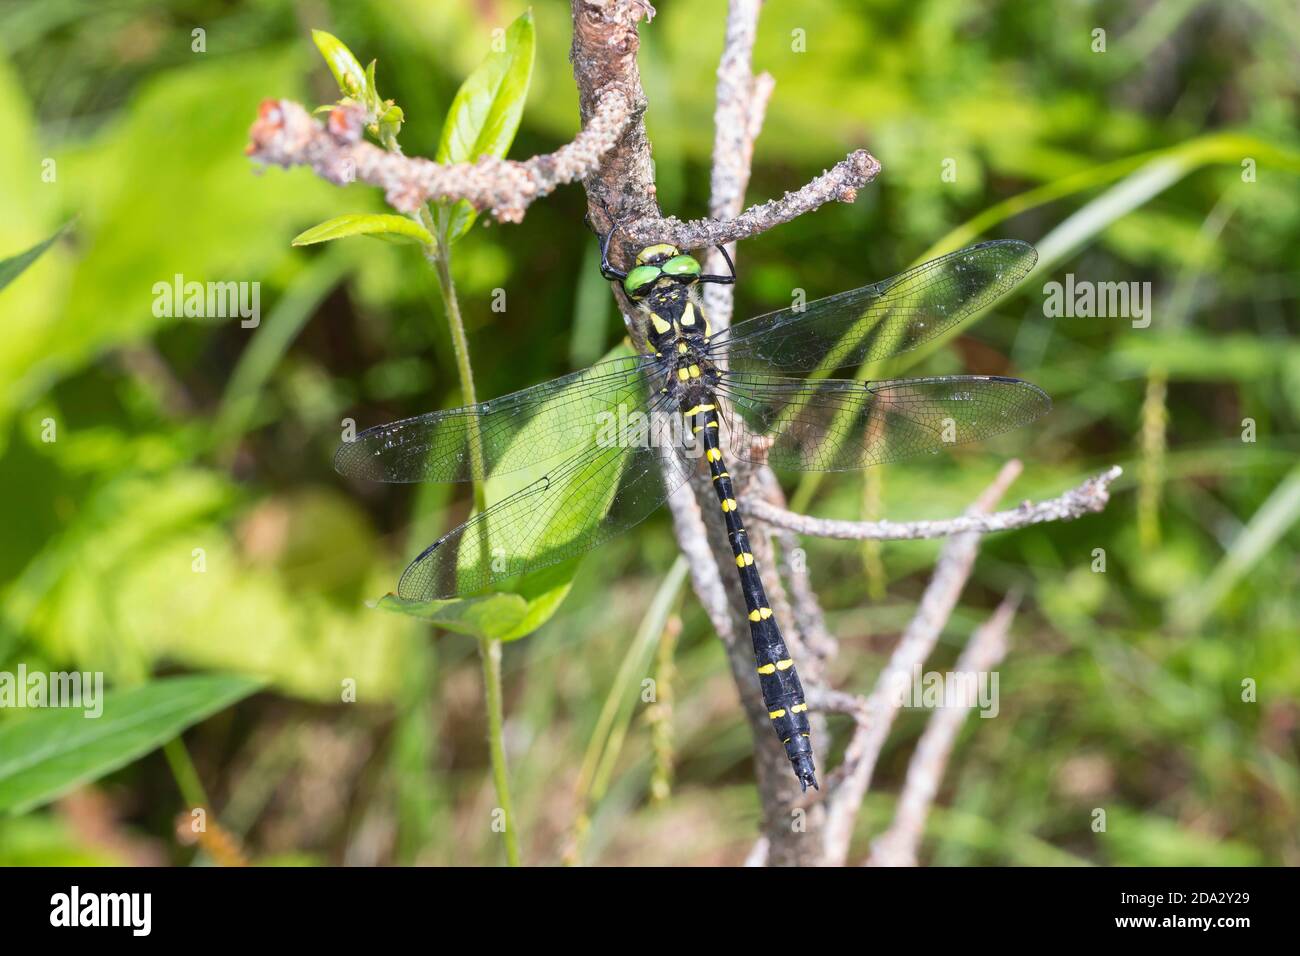 Sombre Goldenring, Two-toothed Goldenring (Cordulegaster bidentatus, Cordulegaster bidentata), sits at a twig, Austria, Carinthia Stock Photo